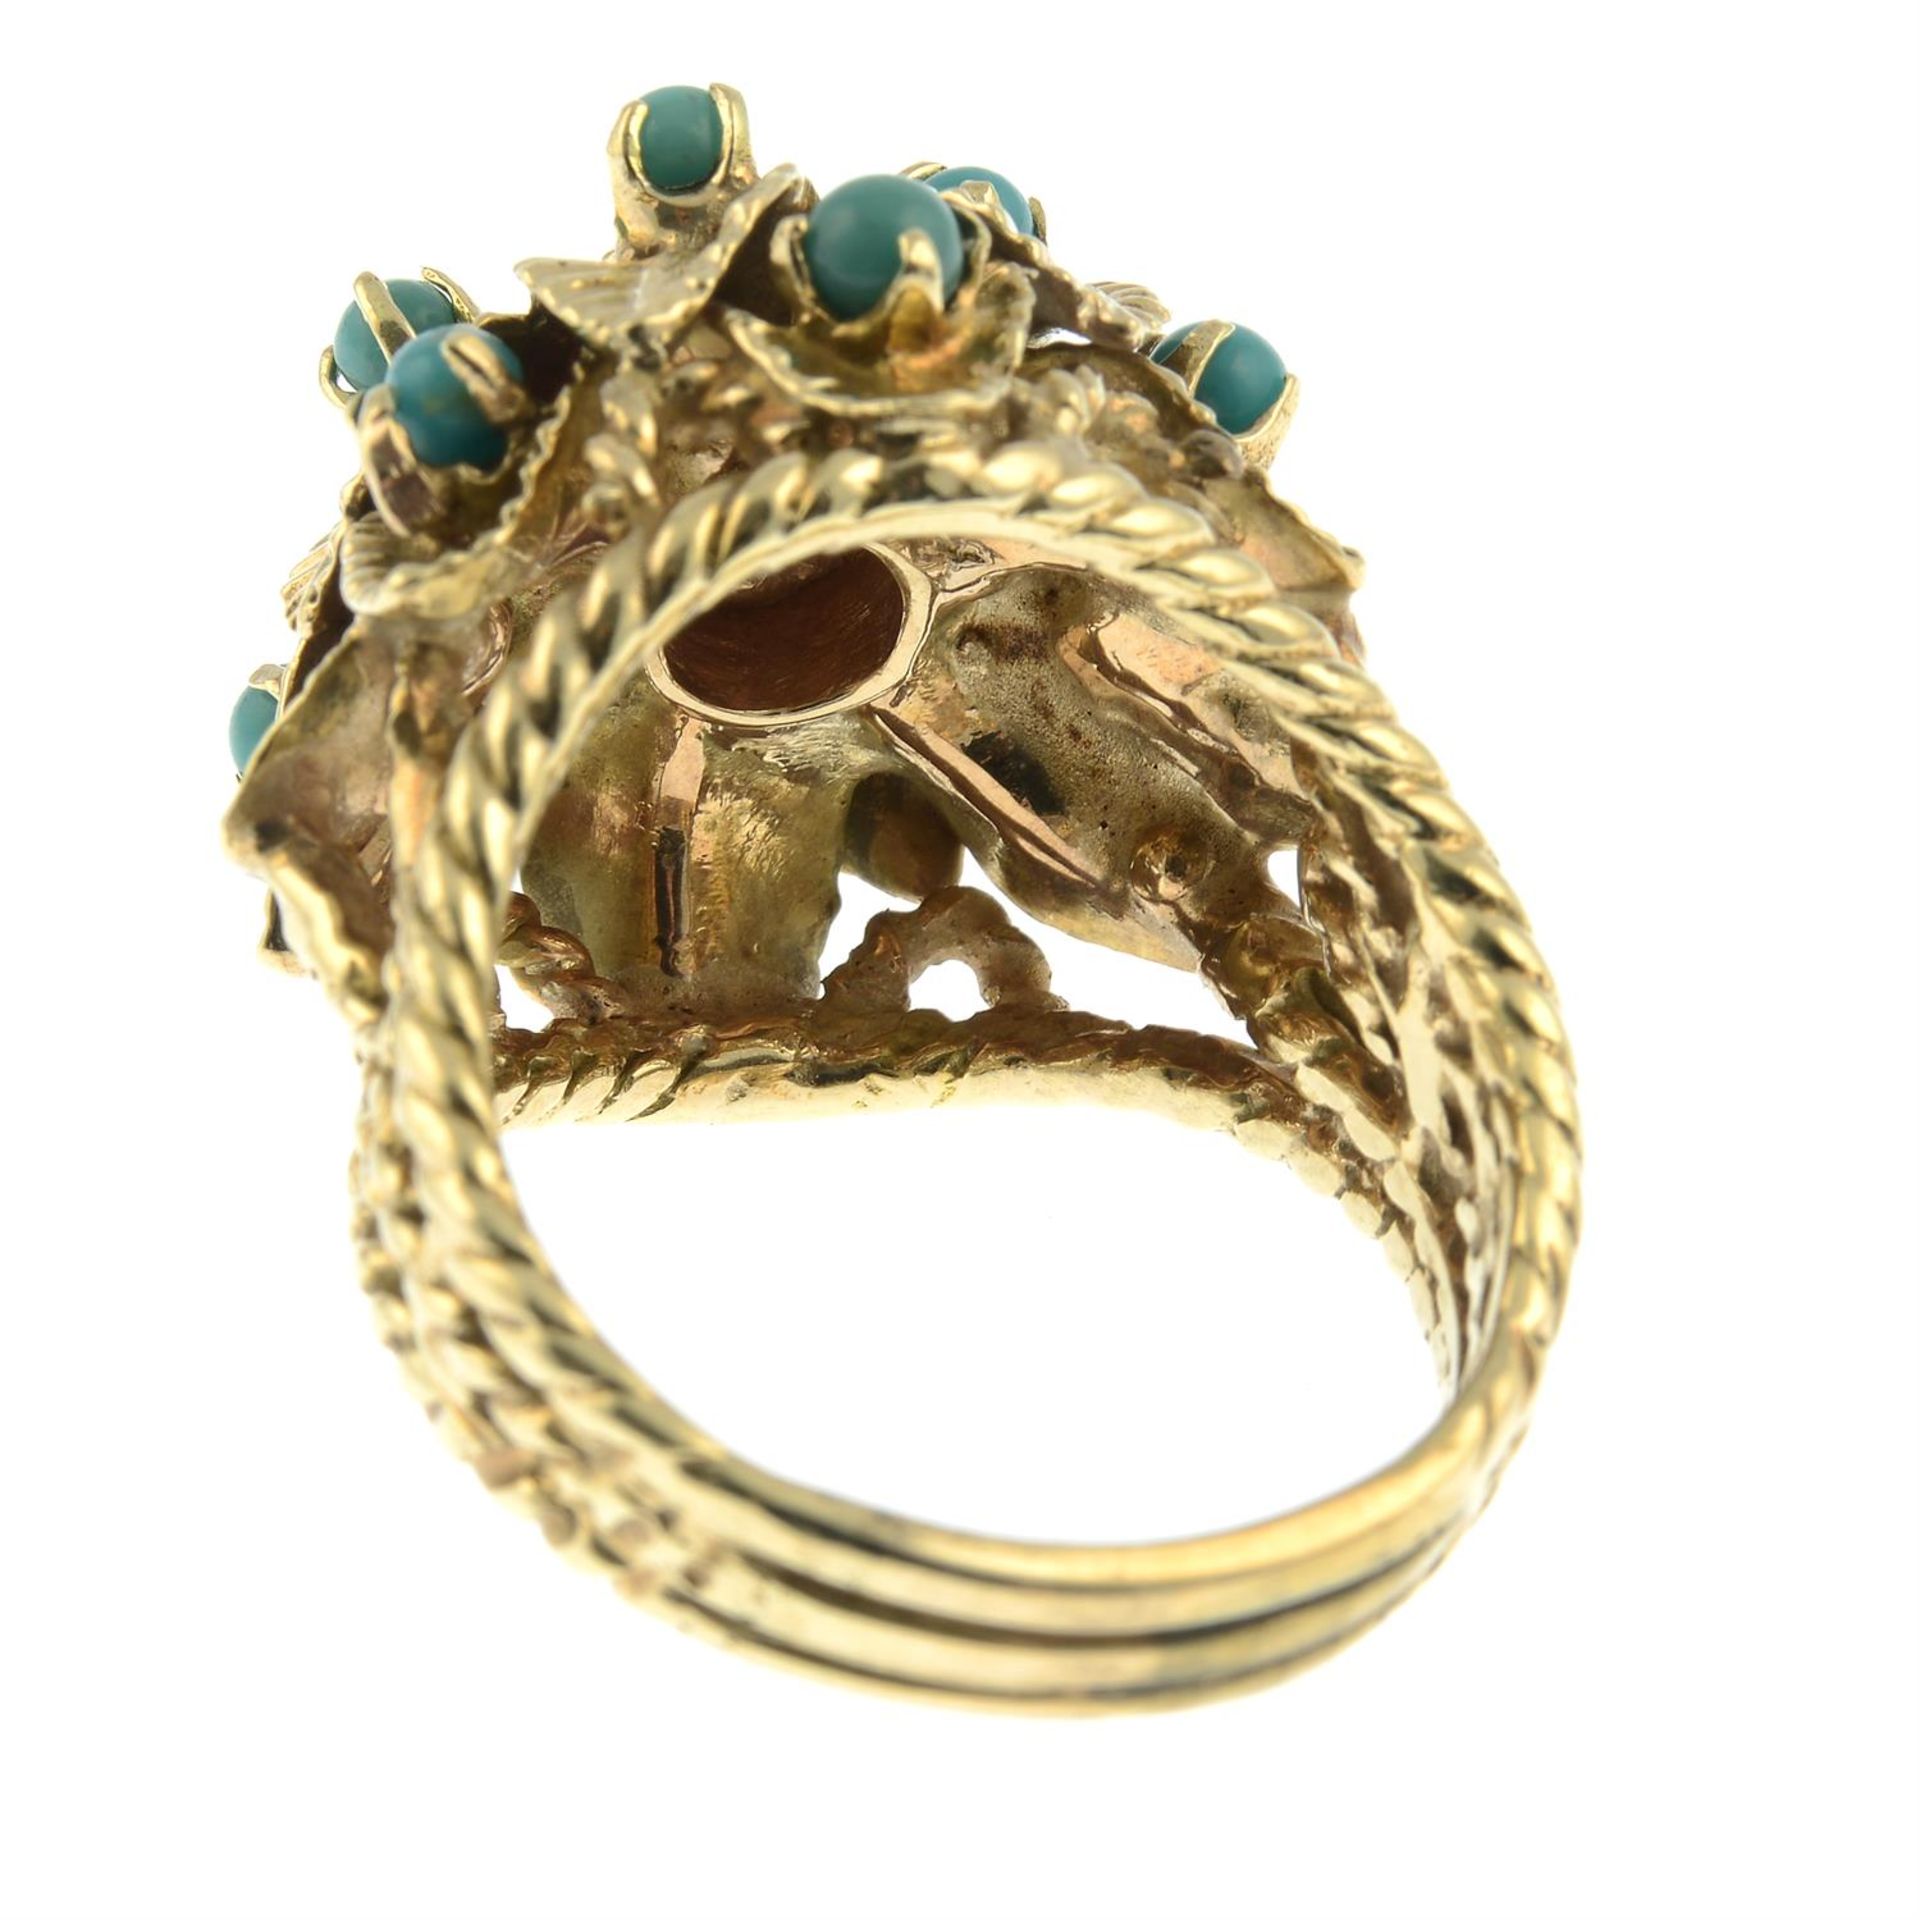 A diamond and green gem dress ring. - Image 2 of 2